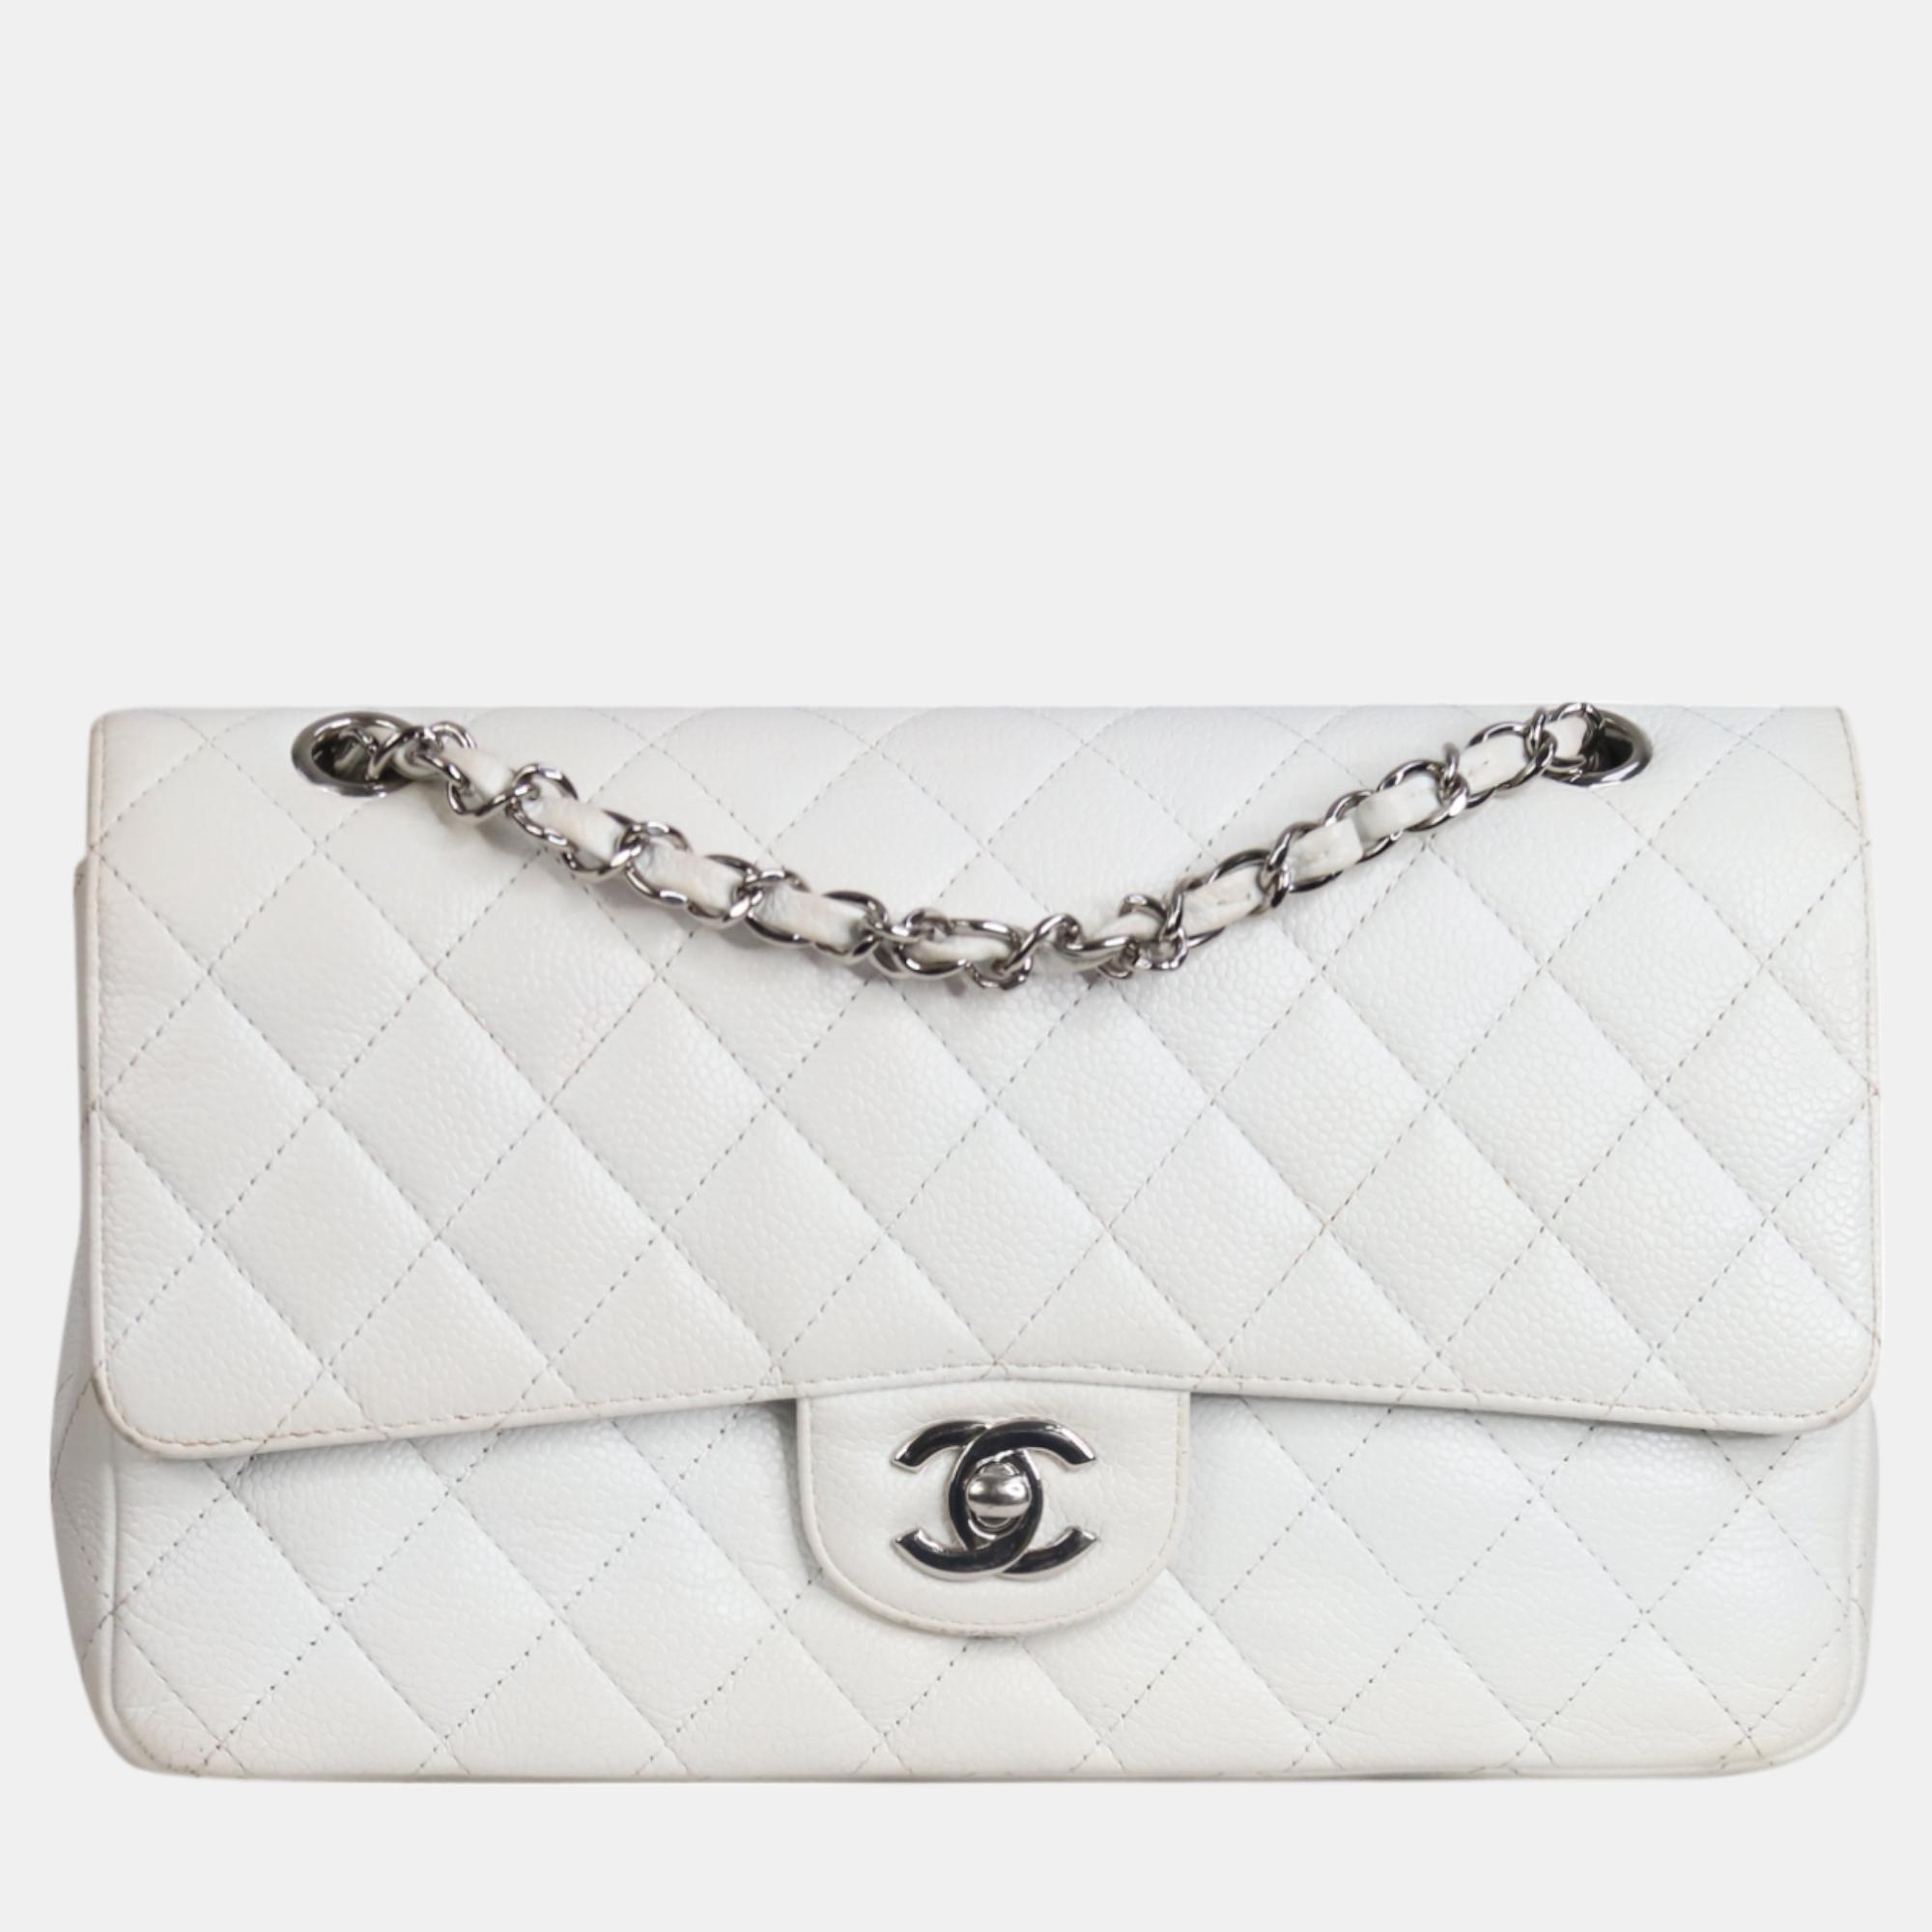 Chanel white leather classic double flap bag